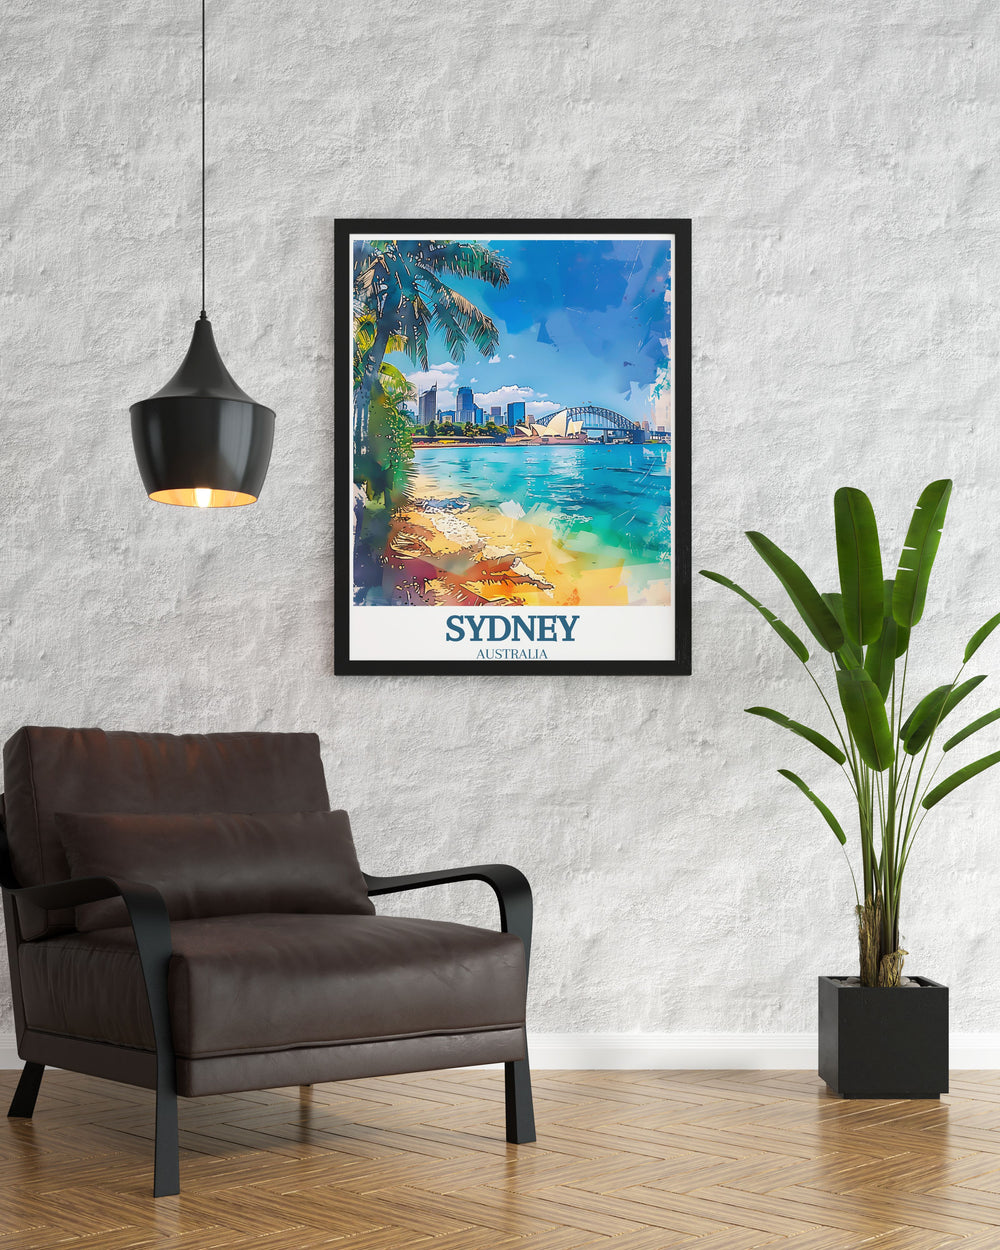 Captivating Sydney Opera House and Sydney Harbour Bridge print in a retro travel poster style ideal for those who love Australia art and want to bring a piece of Sydney into their living space with vibrant and detailed illustrations